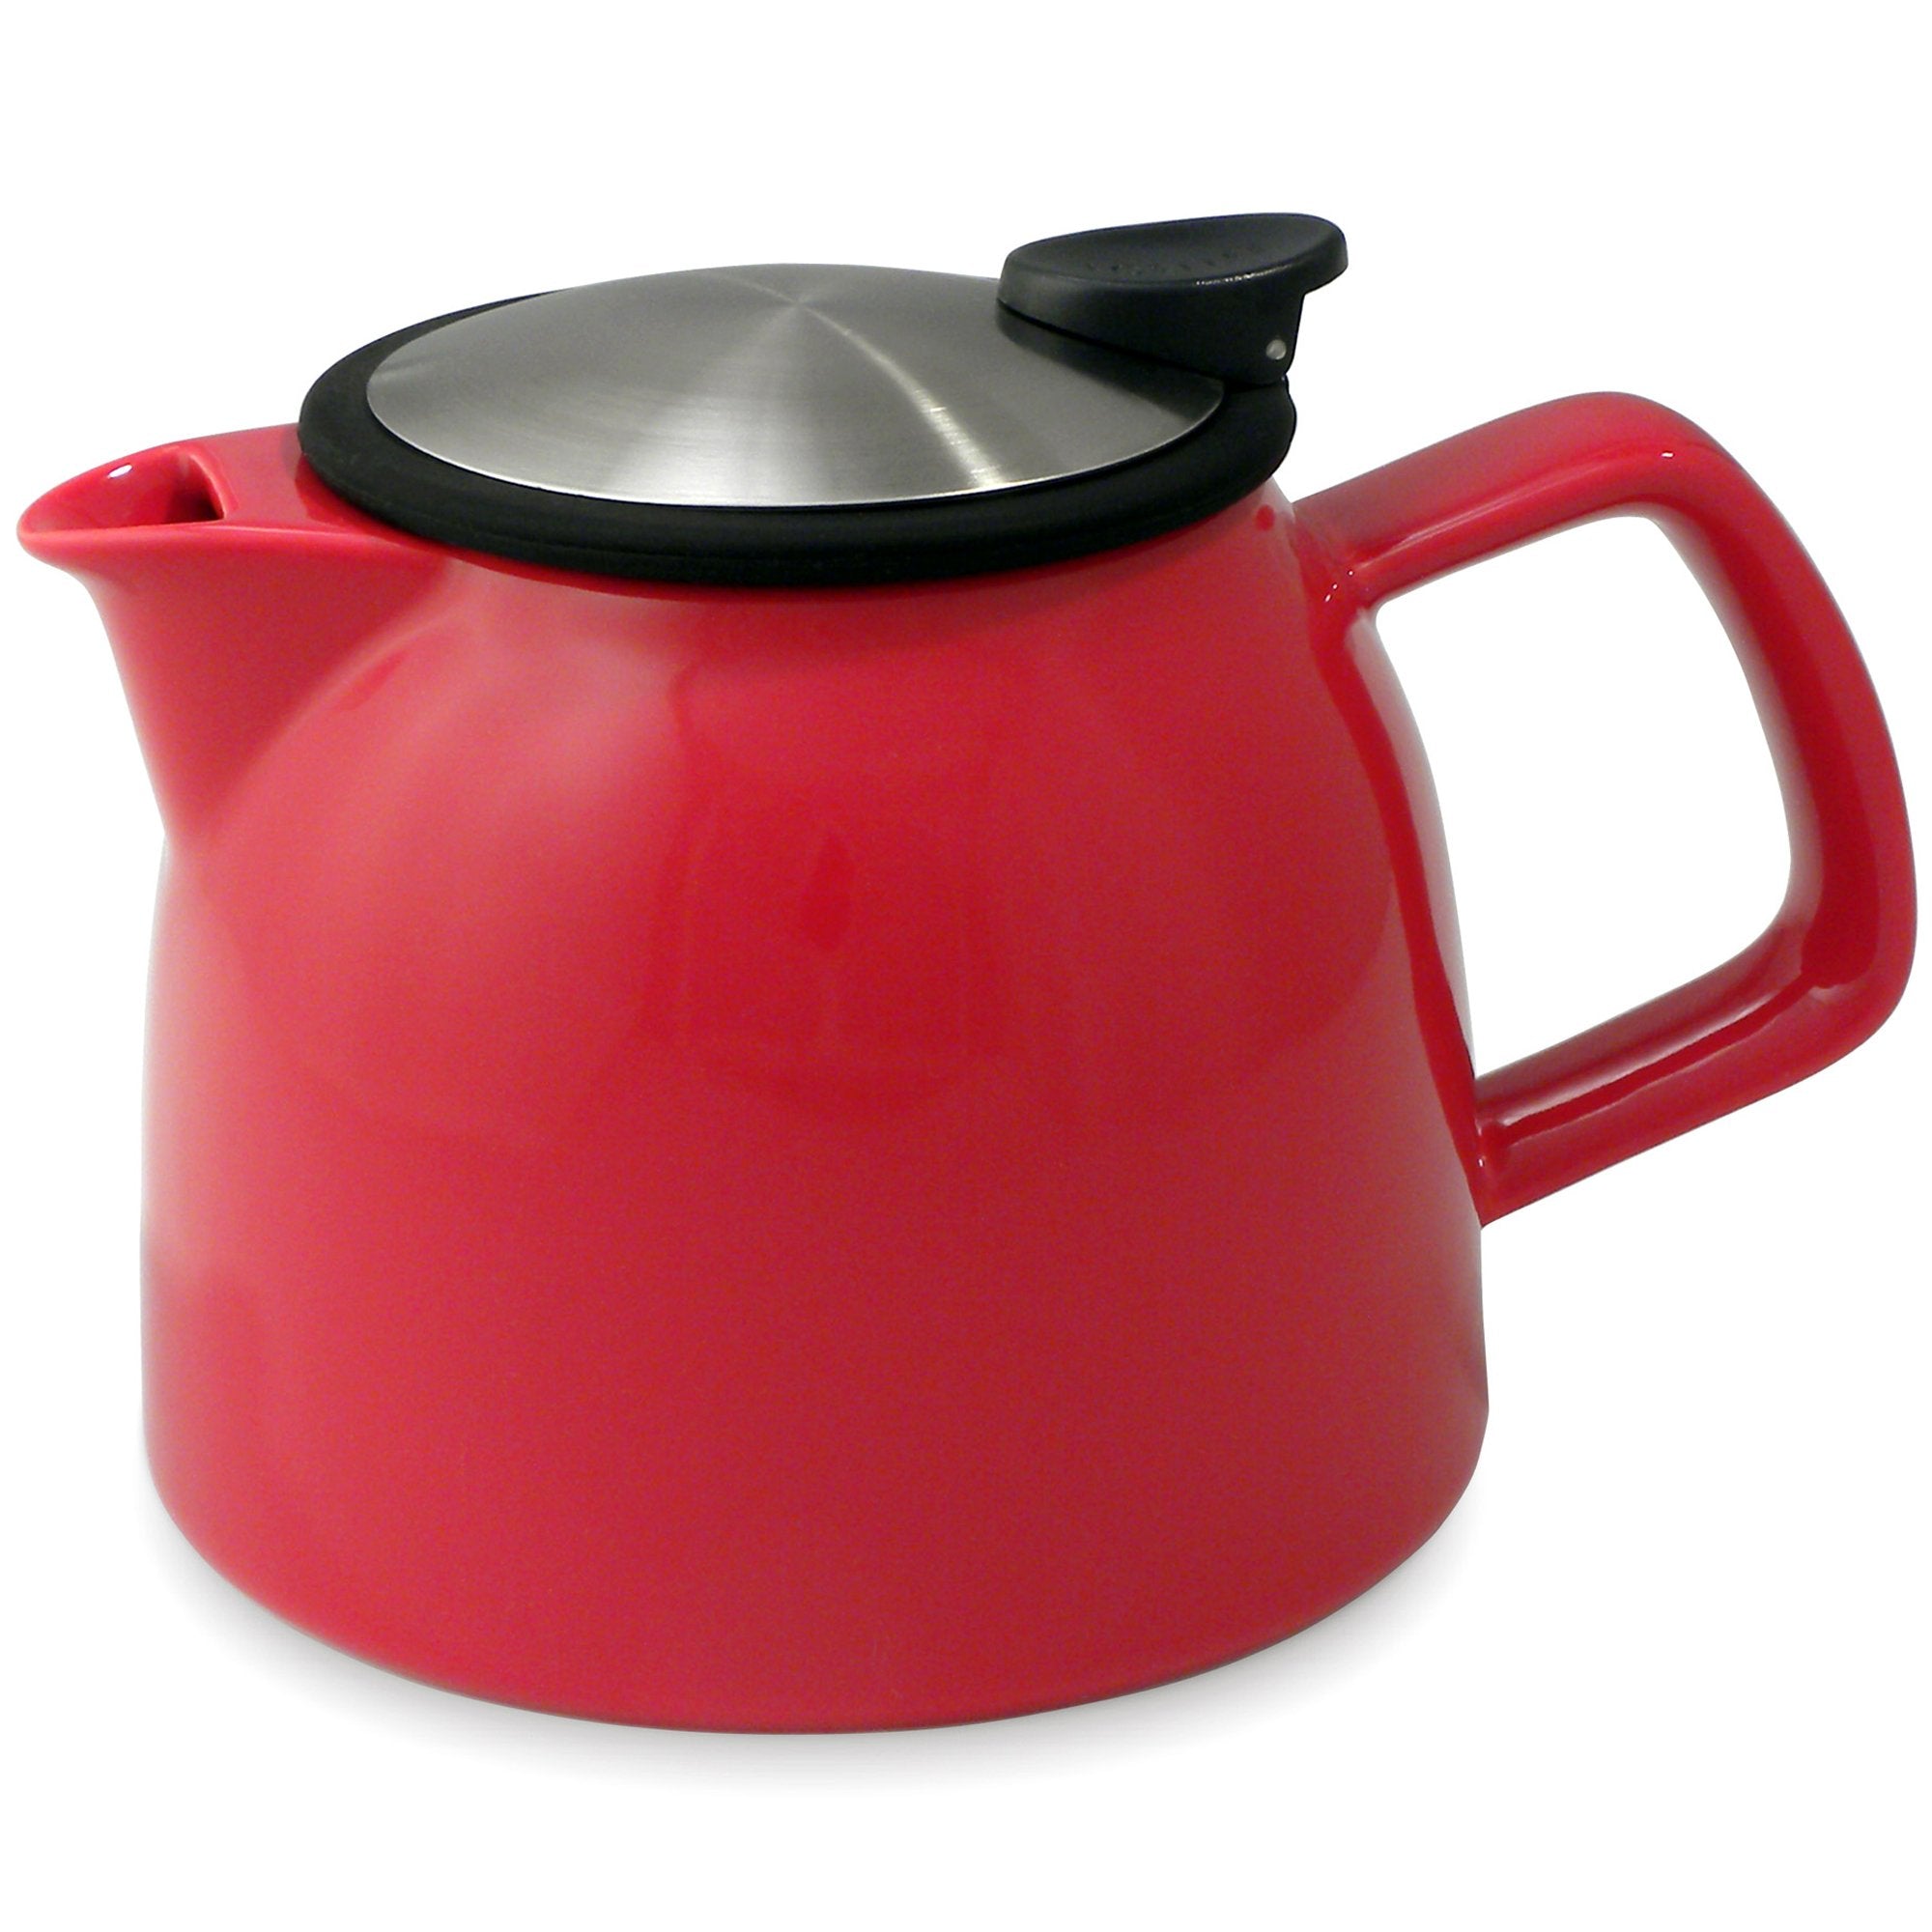 Tealula 26 oz bell-shaped red teapot with square handle and black and silver detachable push-on-lid